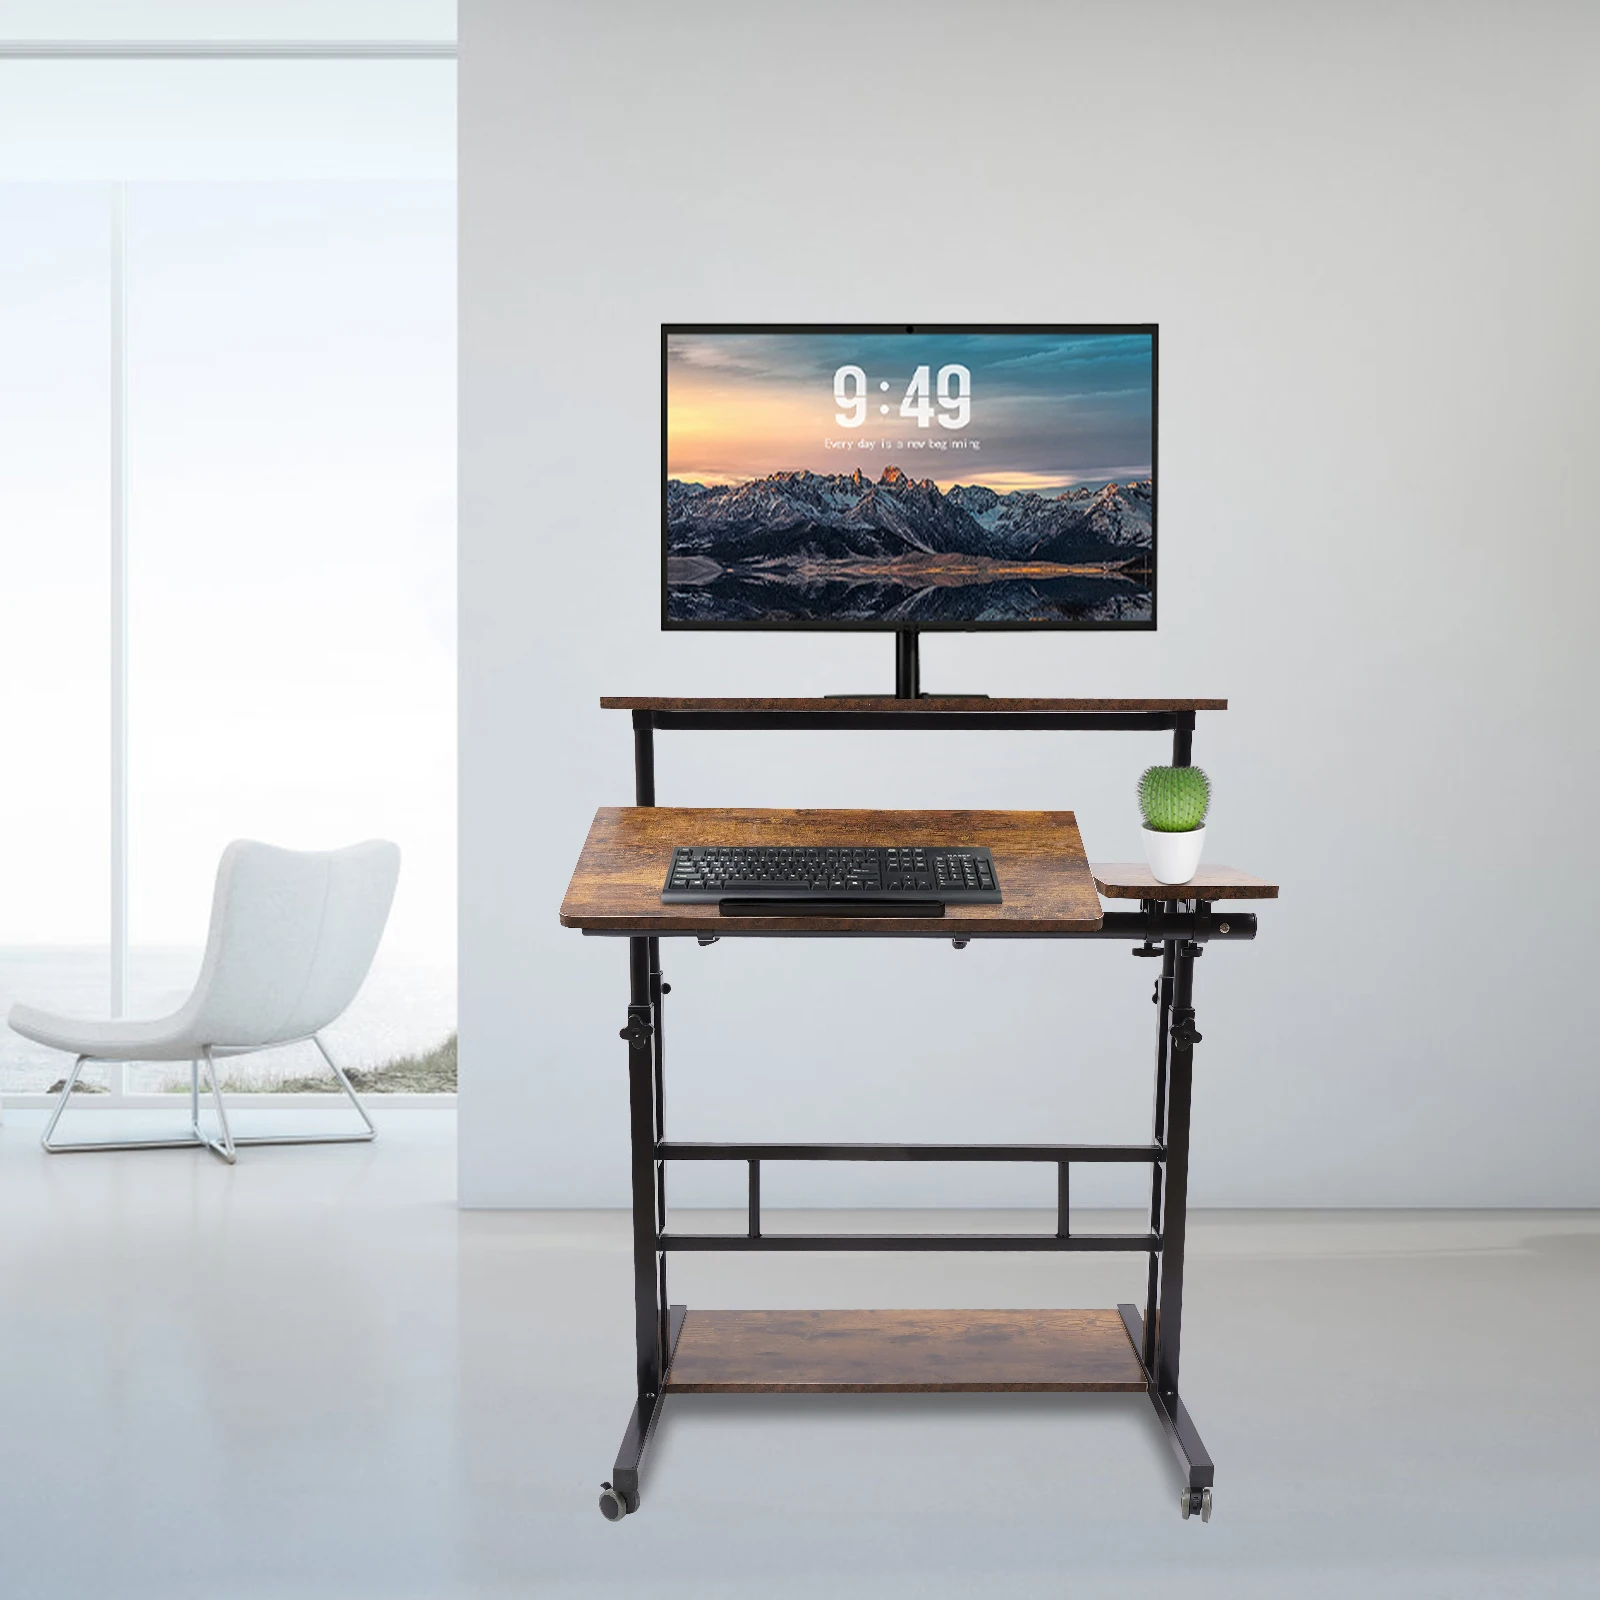 Rolling Table Laptop Cart Standing Sitting Mobile Laptop Desk Home Office 4 in1 Mobile Standing Laptop Desk Computer Desk Adjust height adjustable sit to stand desk mobile laptop podium tilting desktop and storage cabinet ergonomic rolling lectern cart